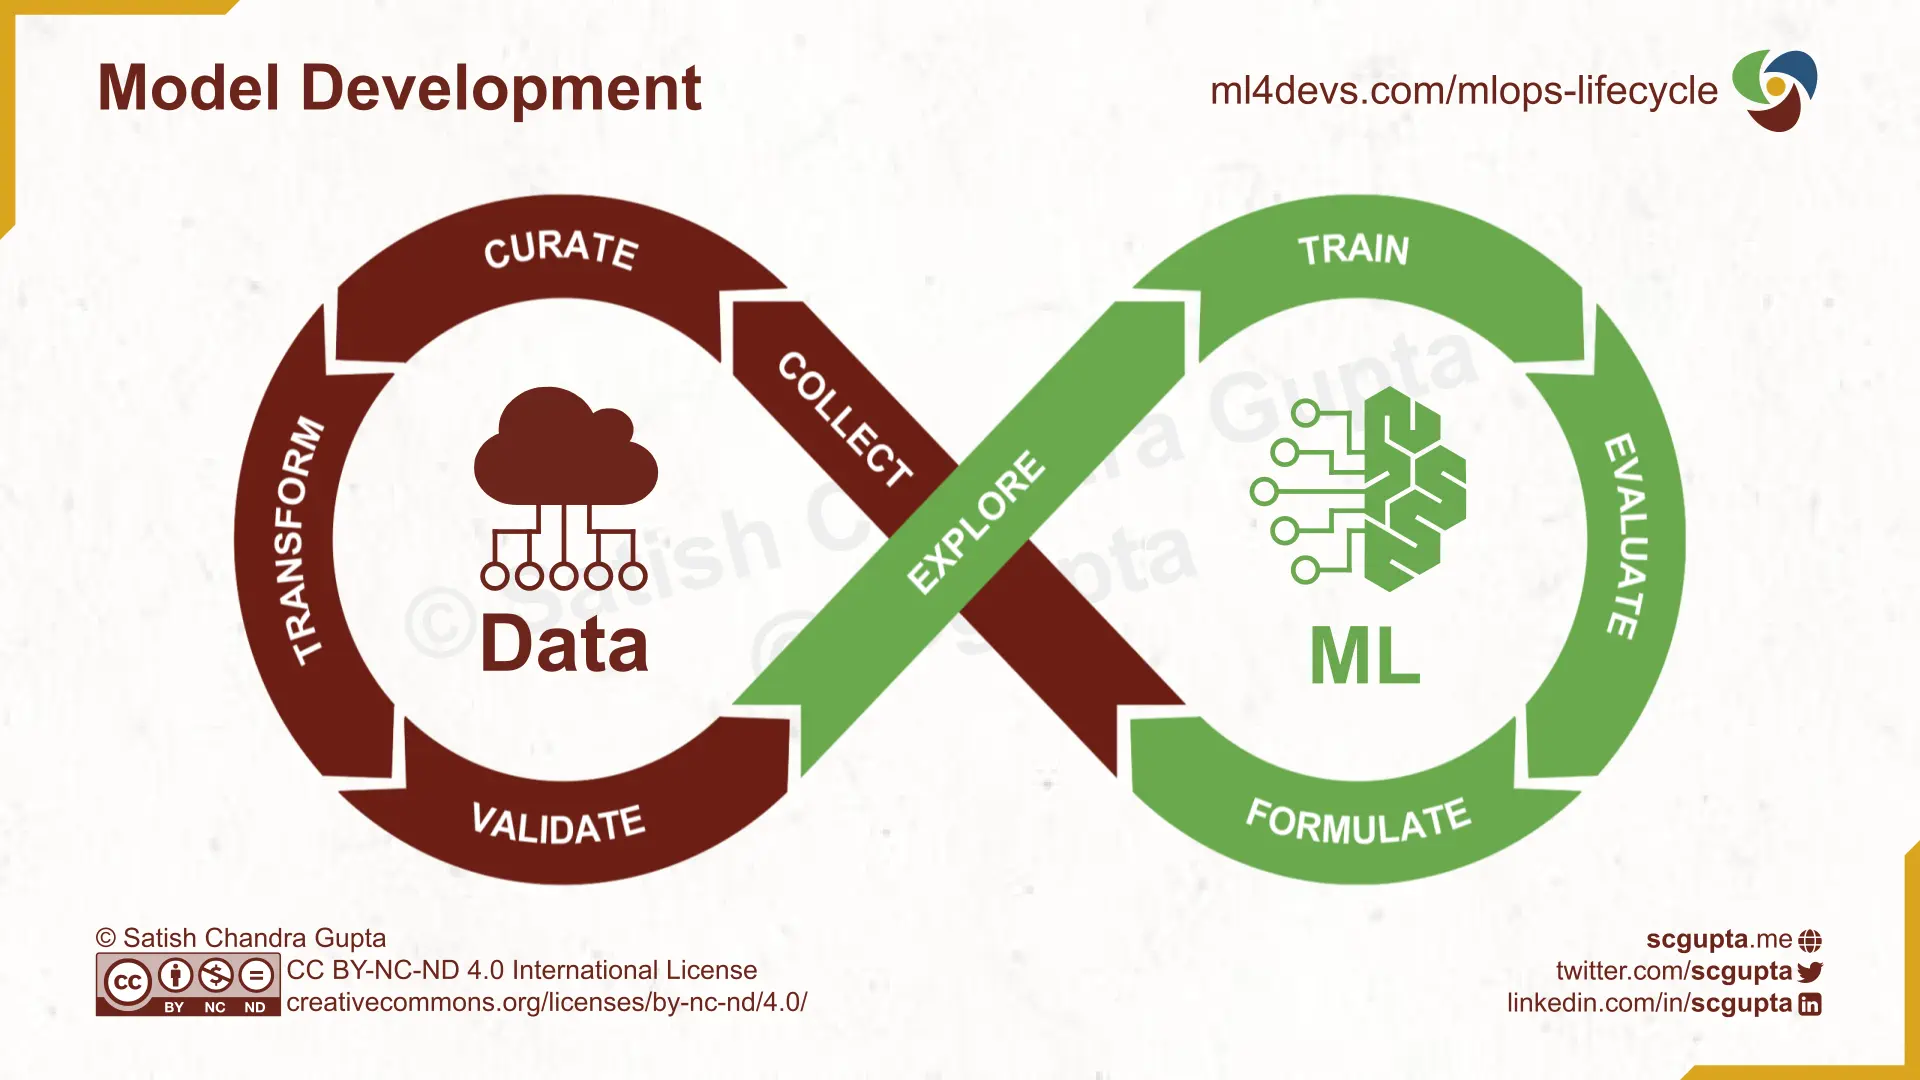 Machine Learning Lifecycle for Model Development